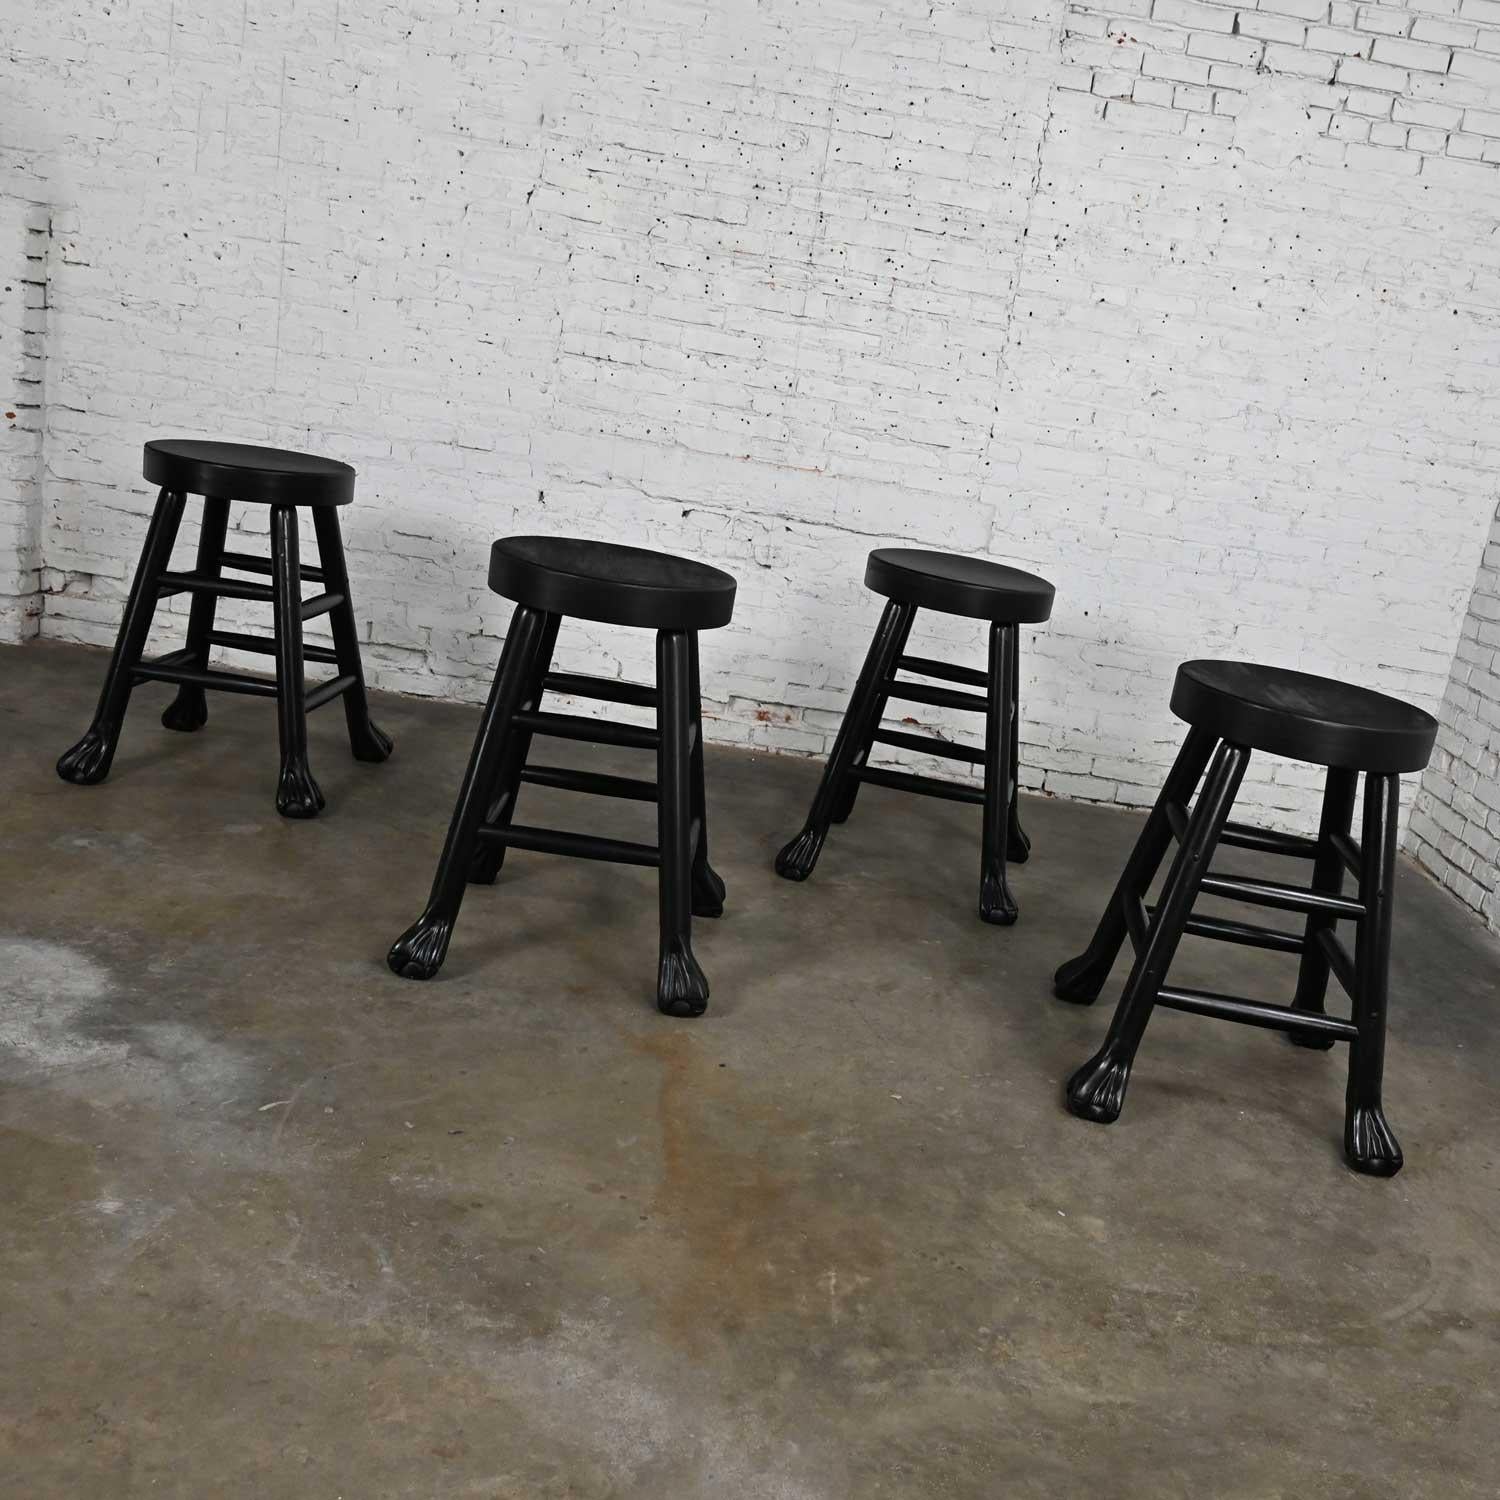 Vintage Rustic Blackened Solid Hardwood Chunky Claw Foot Barstools Set of 4 For Sale 2